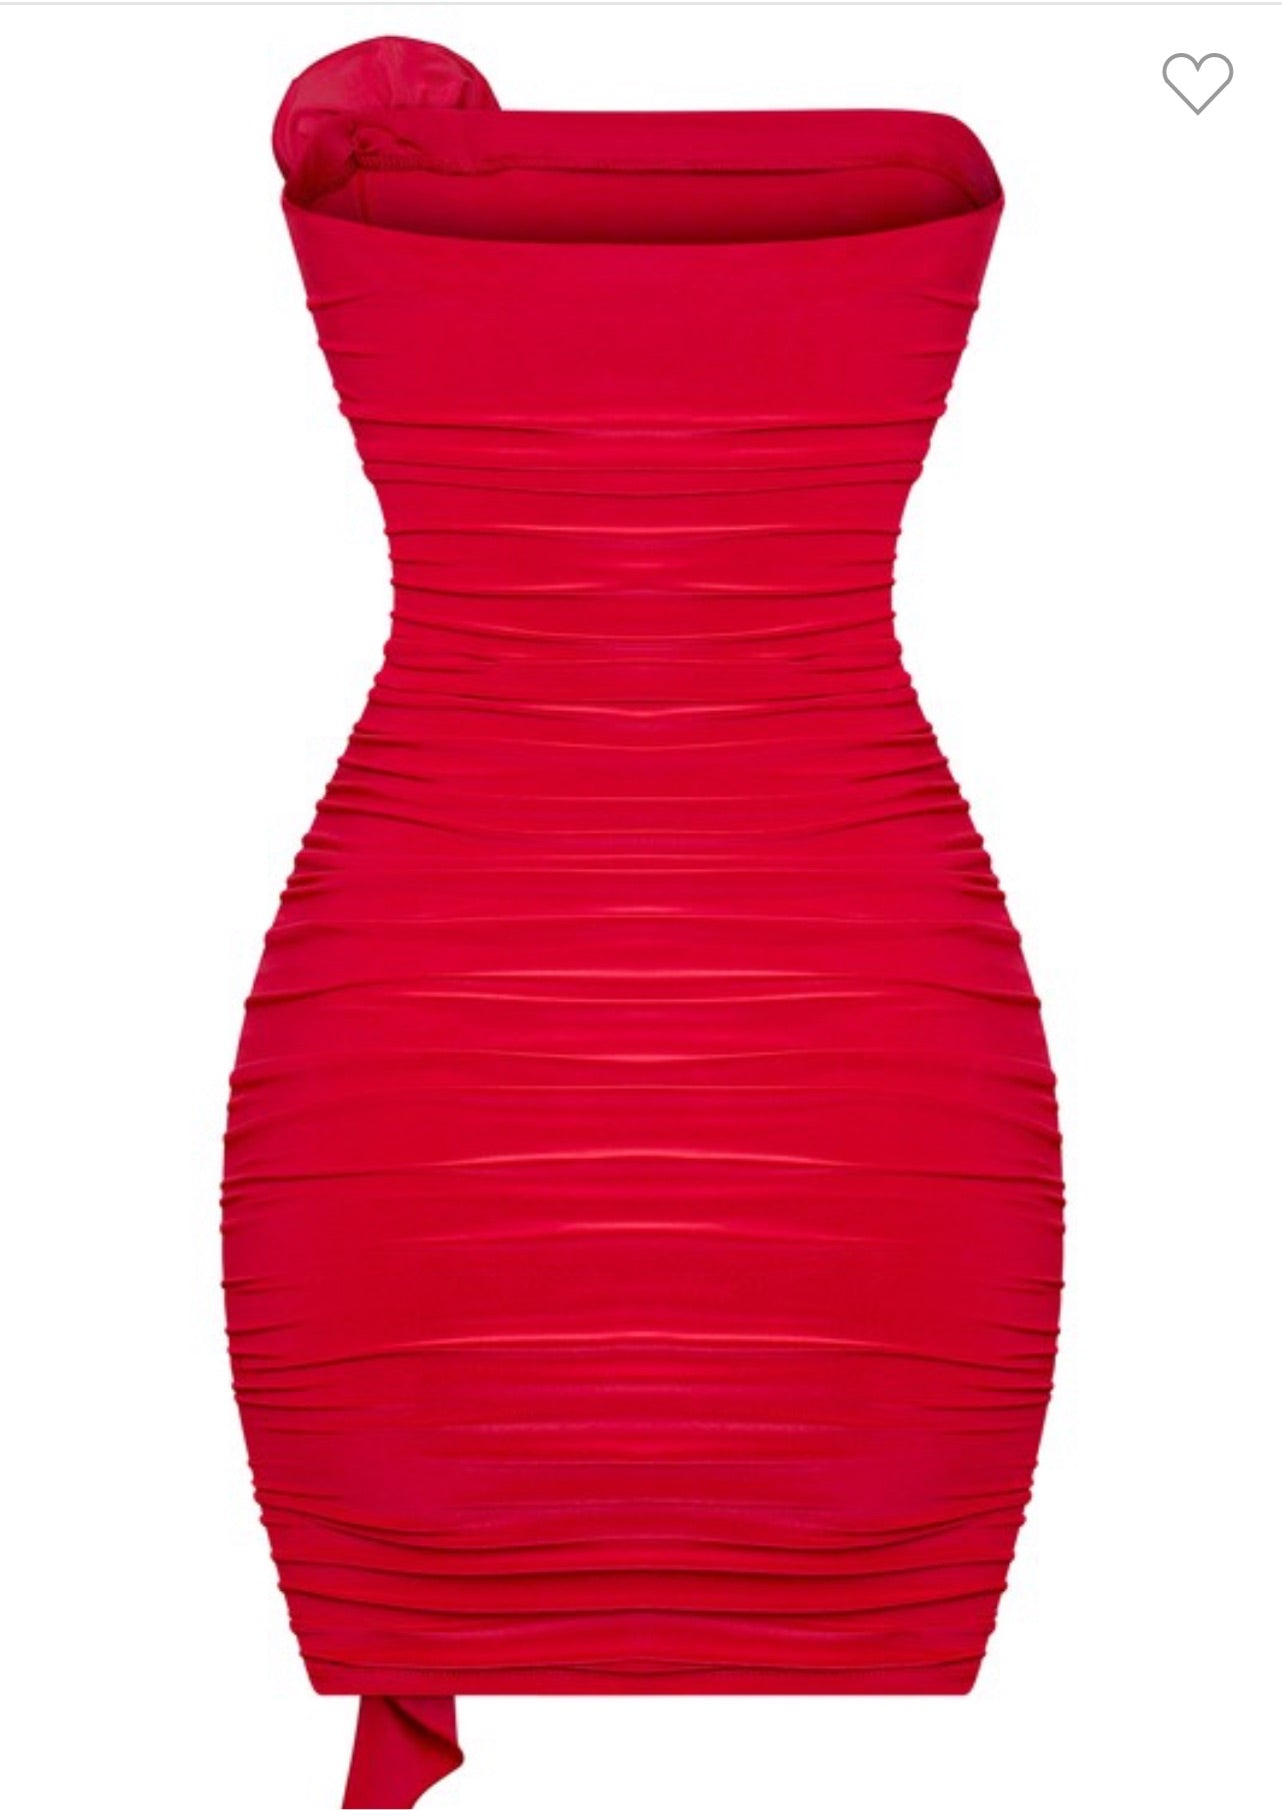 Ruched Mesh Bodycon Dress in Red, VENUS